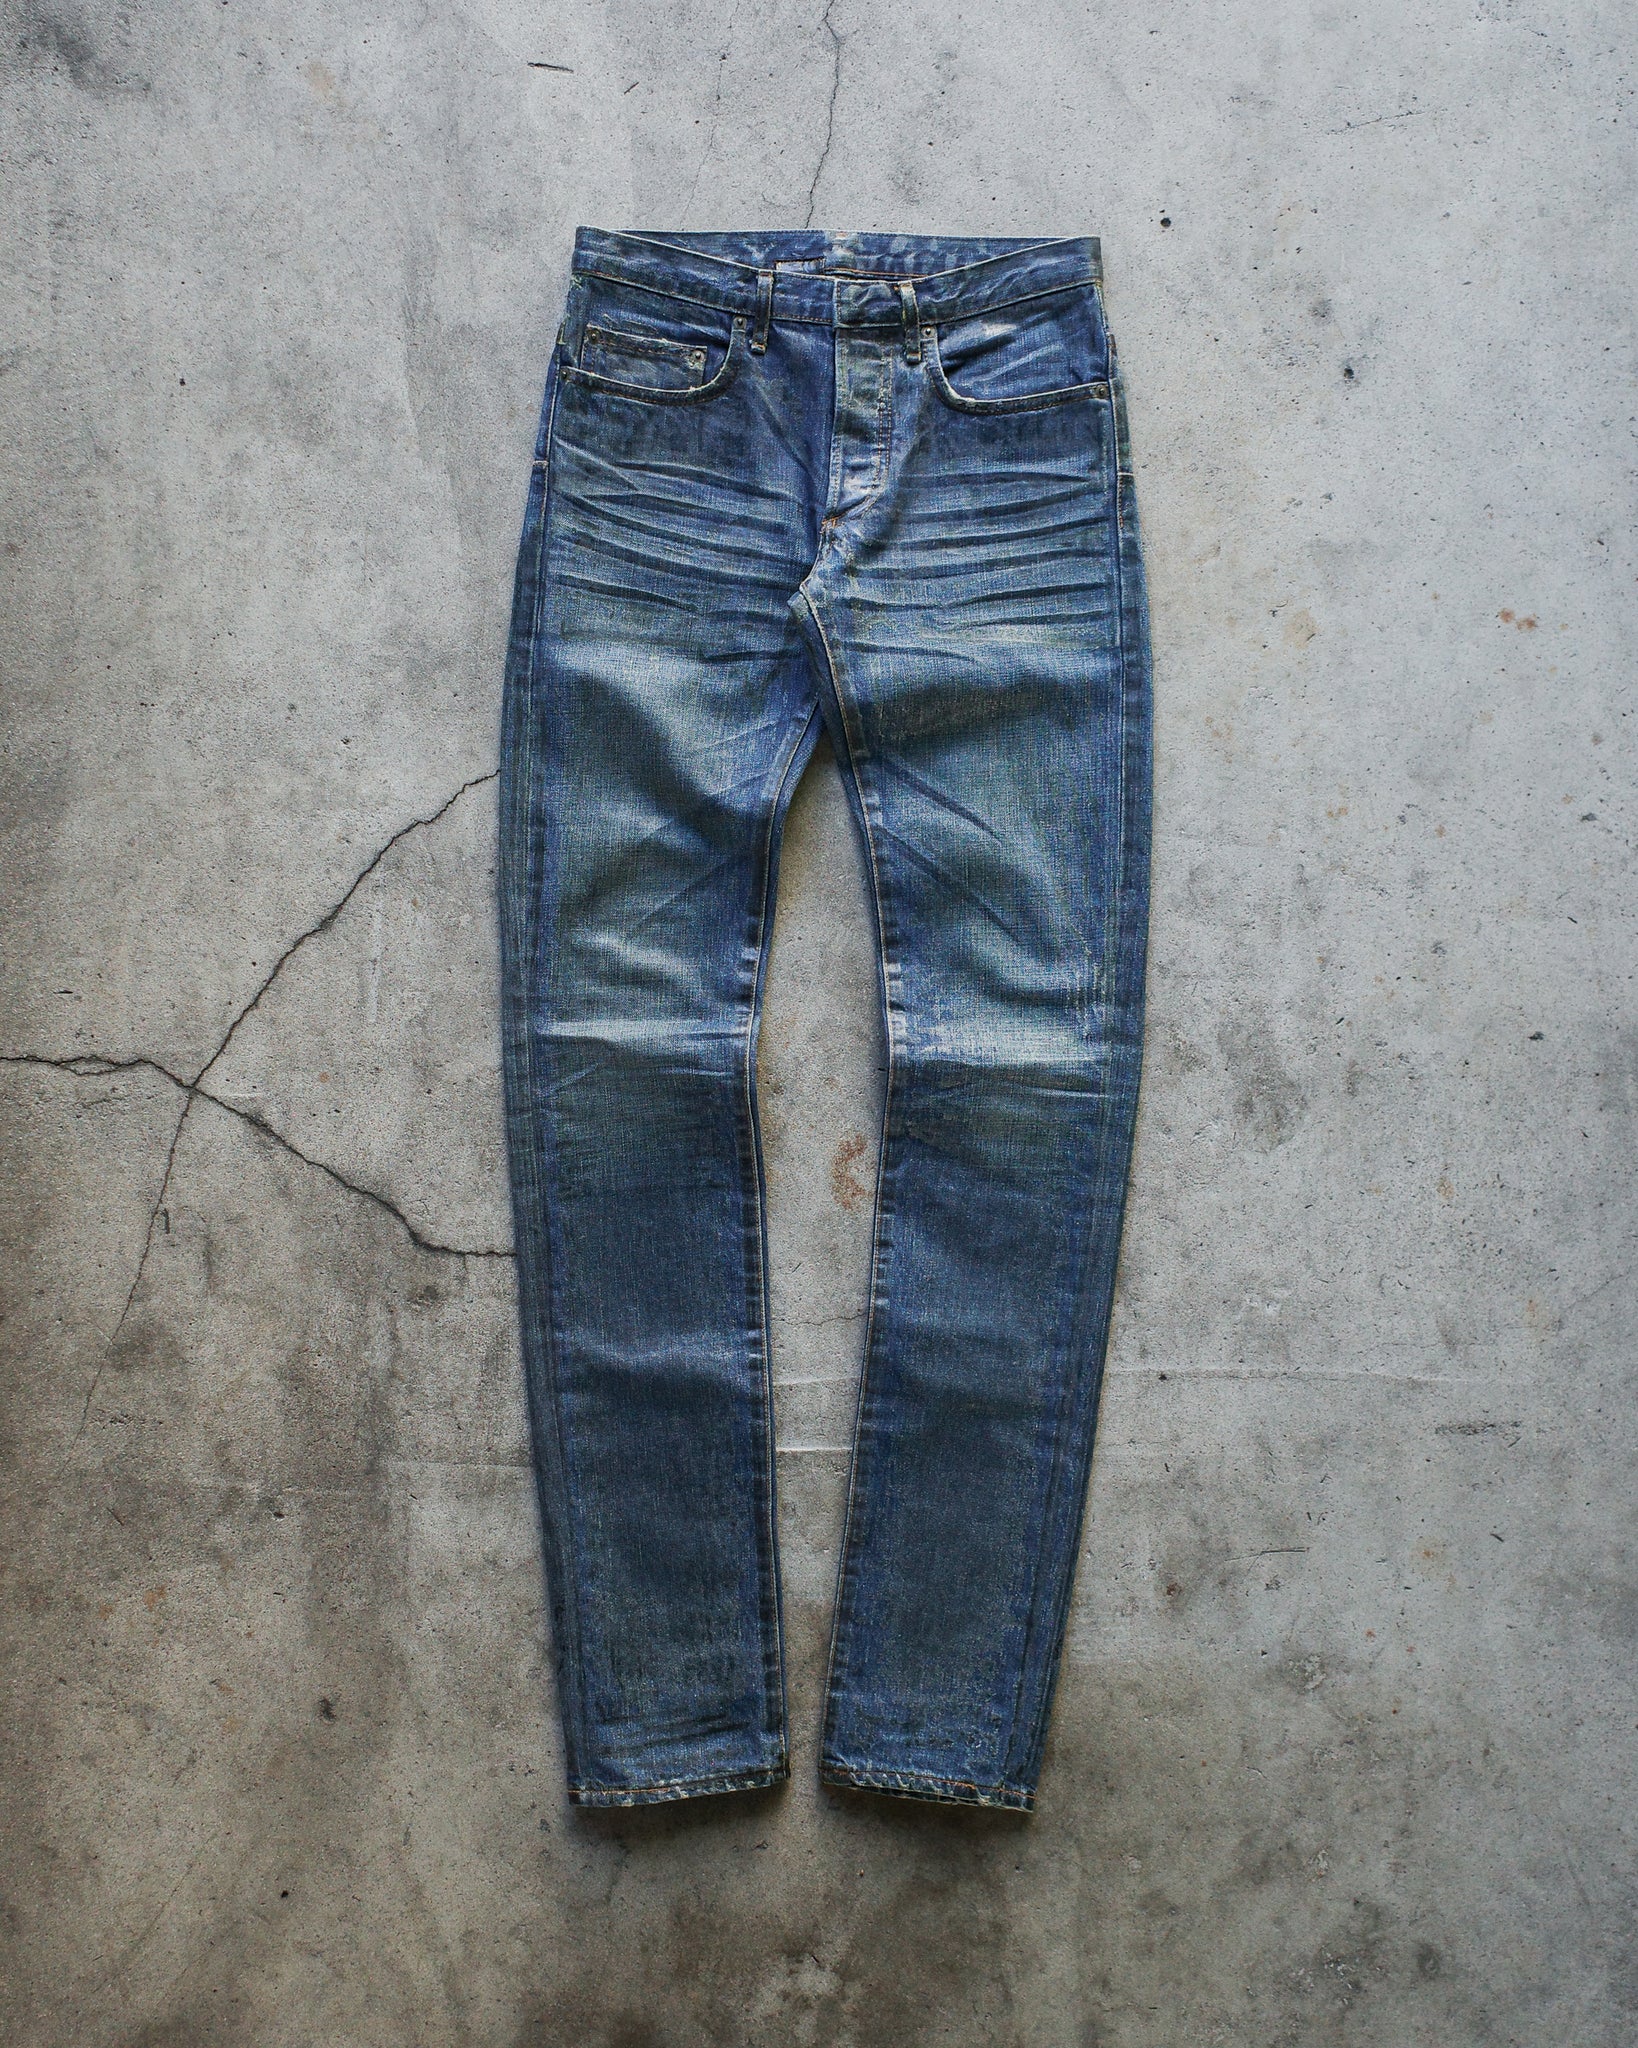 Dior Homme AW03 "Luster" Repaired Waxed Denim